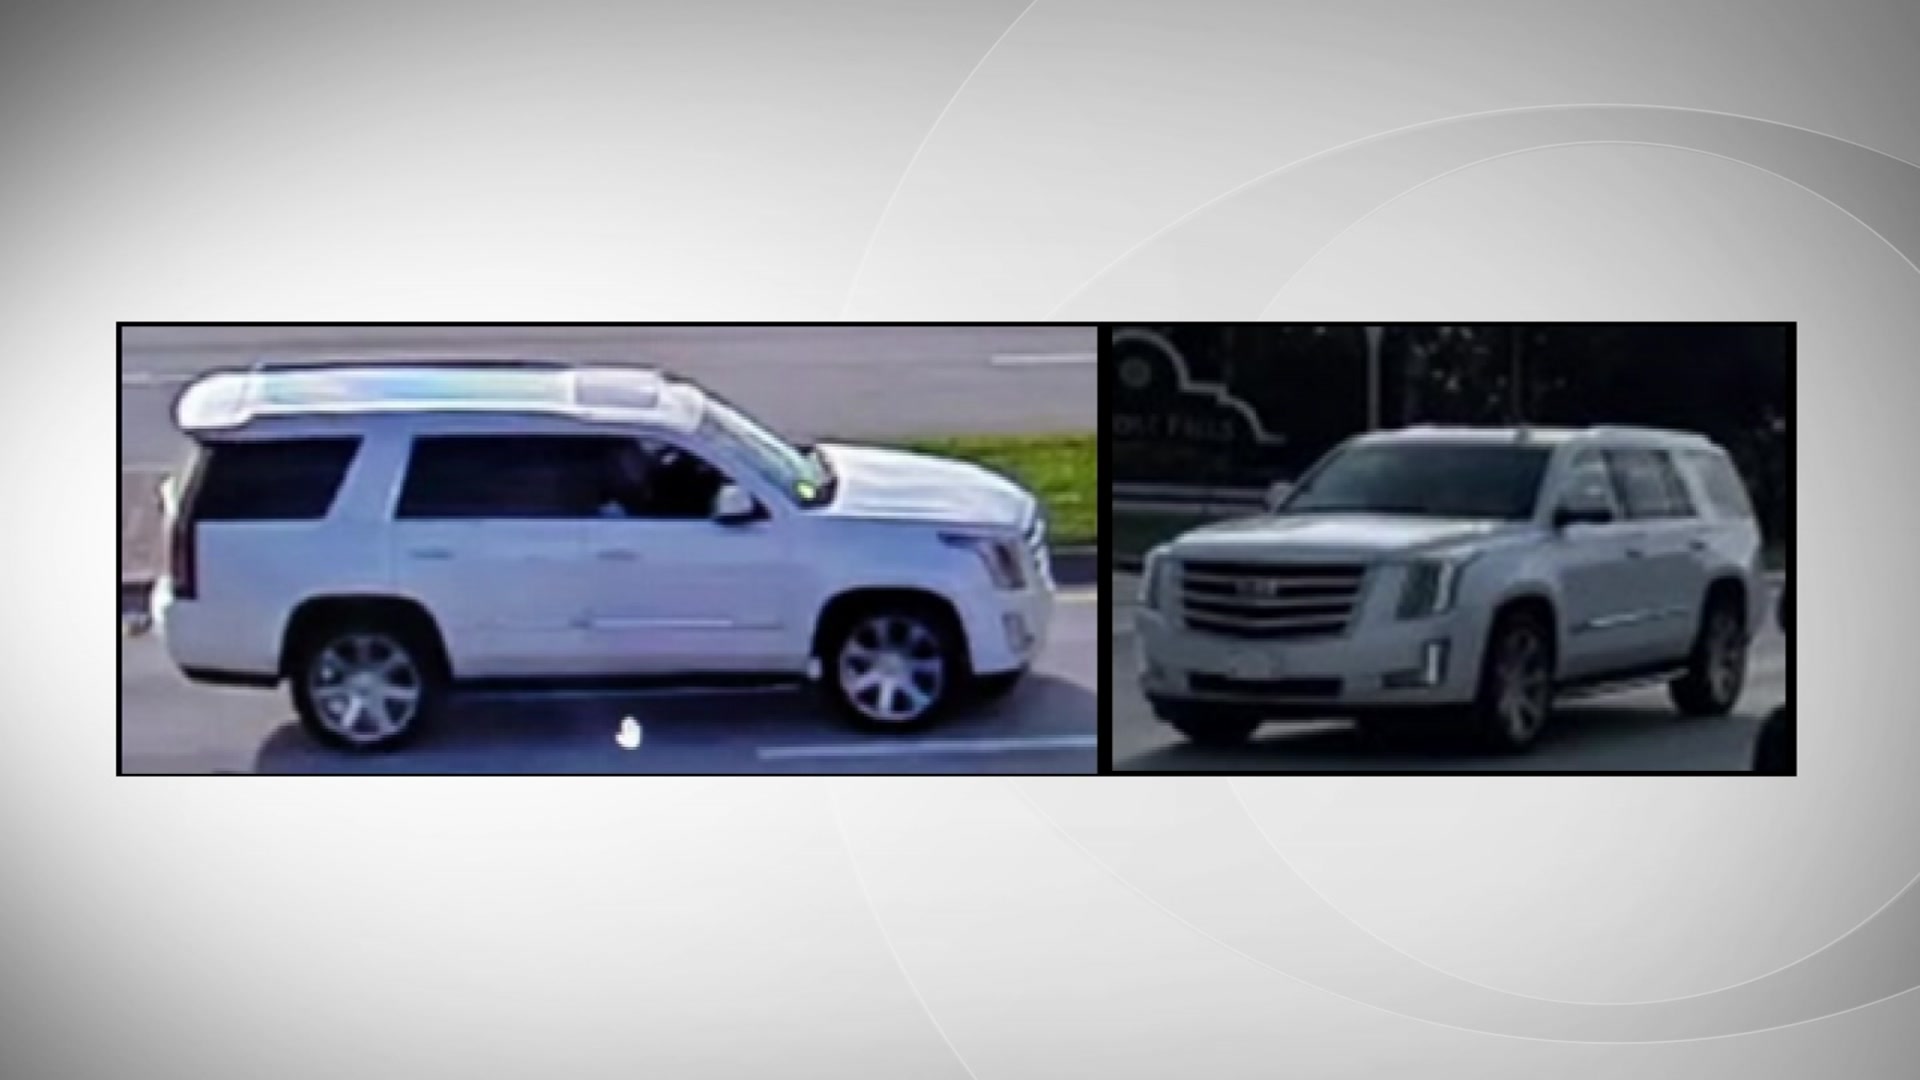 Sheriff’s Investigators Looking For SUV That May Have Been Involved In Deadly Cooper City Shooting